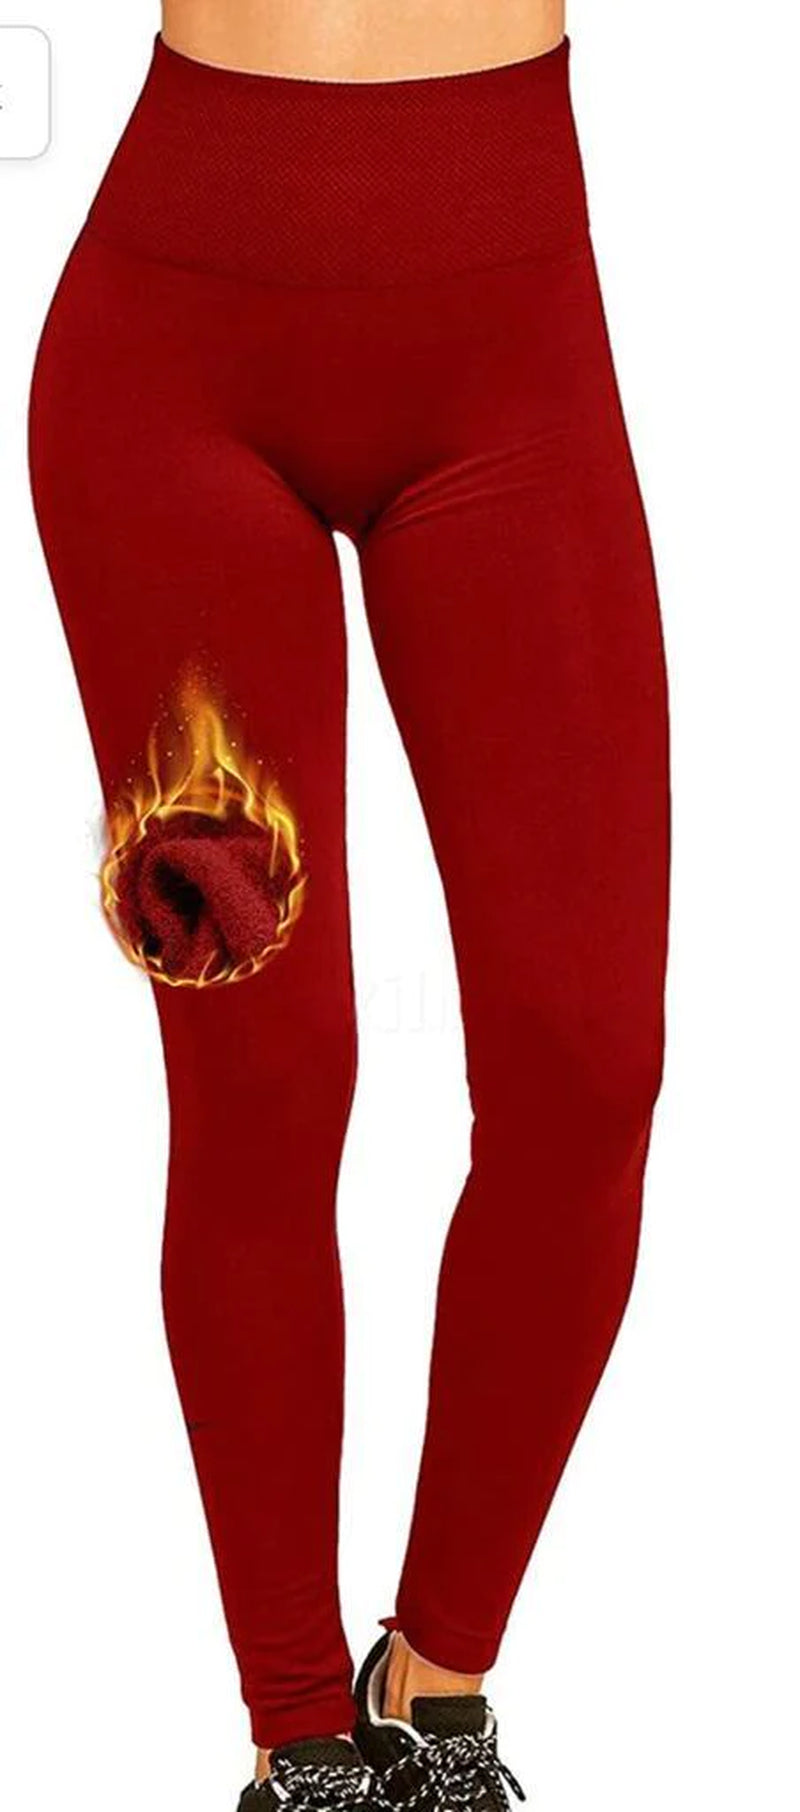 PBG Women's Fleece Leggings - Assorted Colors, High Waist, Stretchy, and Warm - One Size (Recommended for Small-Large)